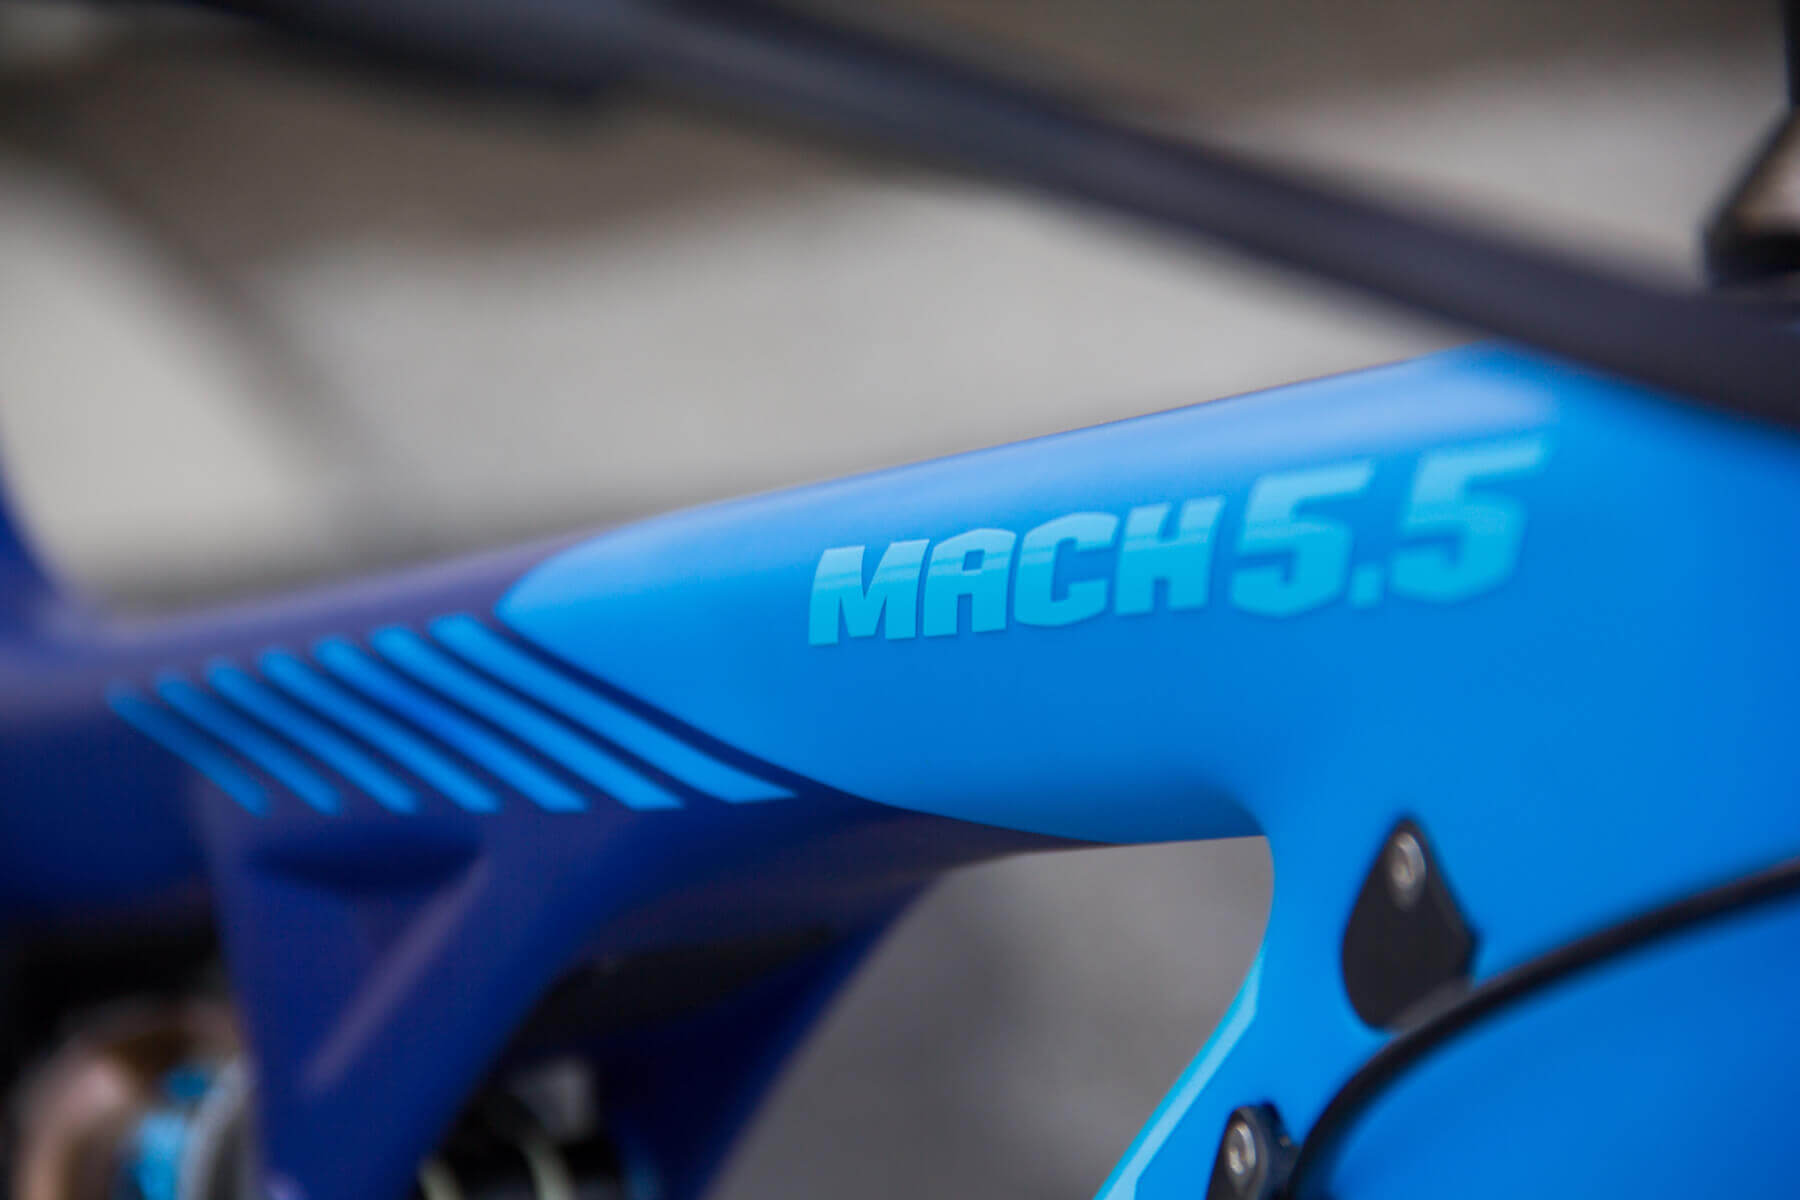 Pivot 5.5 Anniversary Edition - The Mach 5.5 is One Sweet Ride.